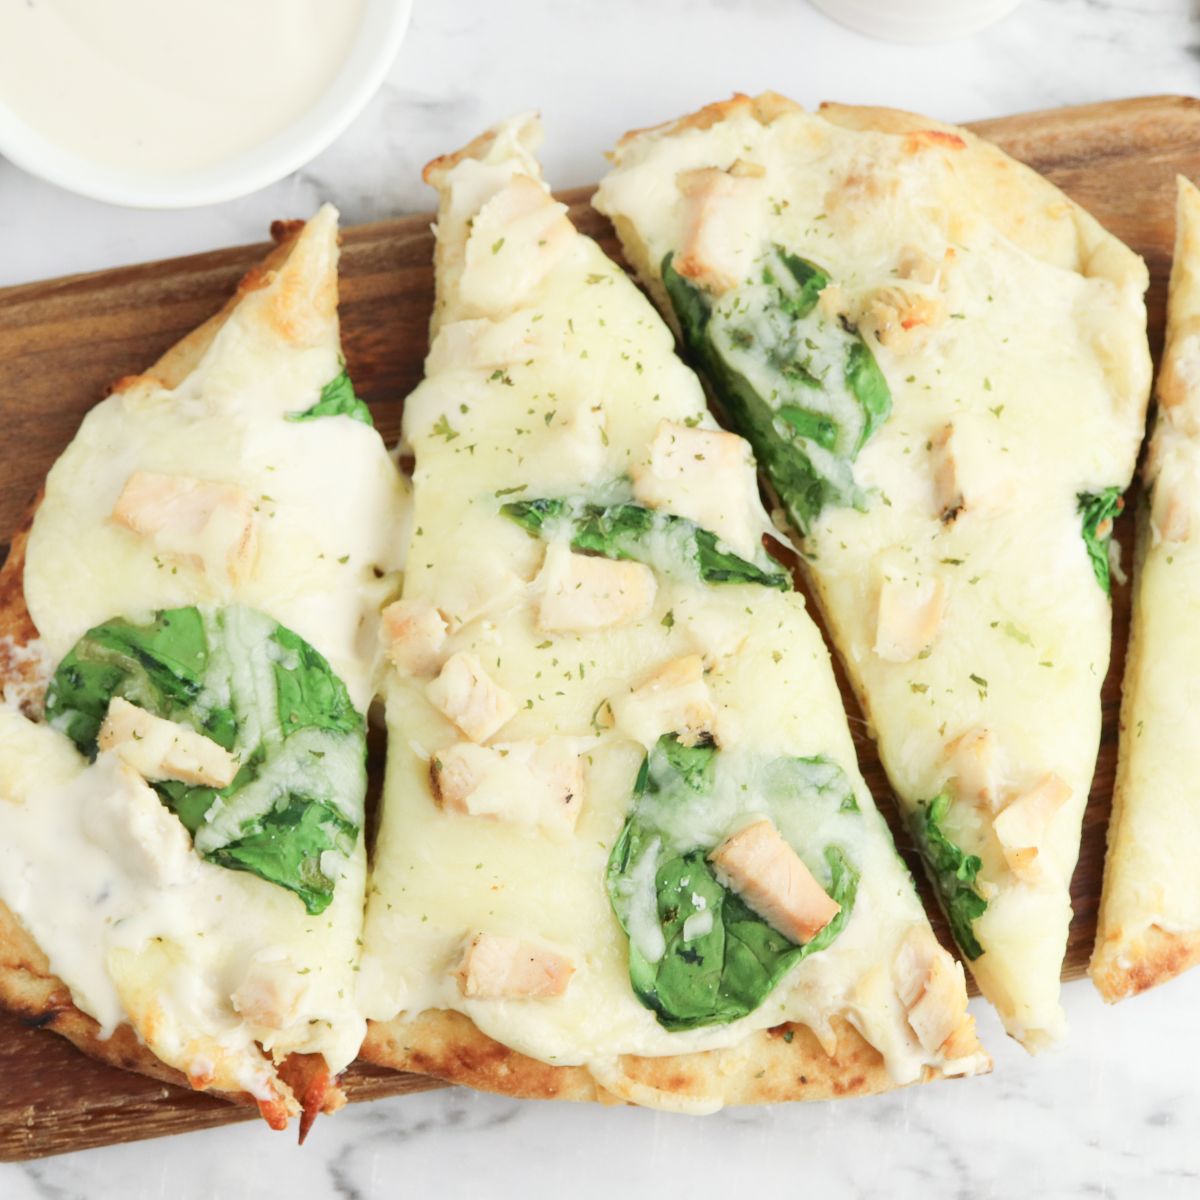 Chicken and spinach pizza on a wooden cutting board.